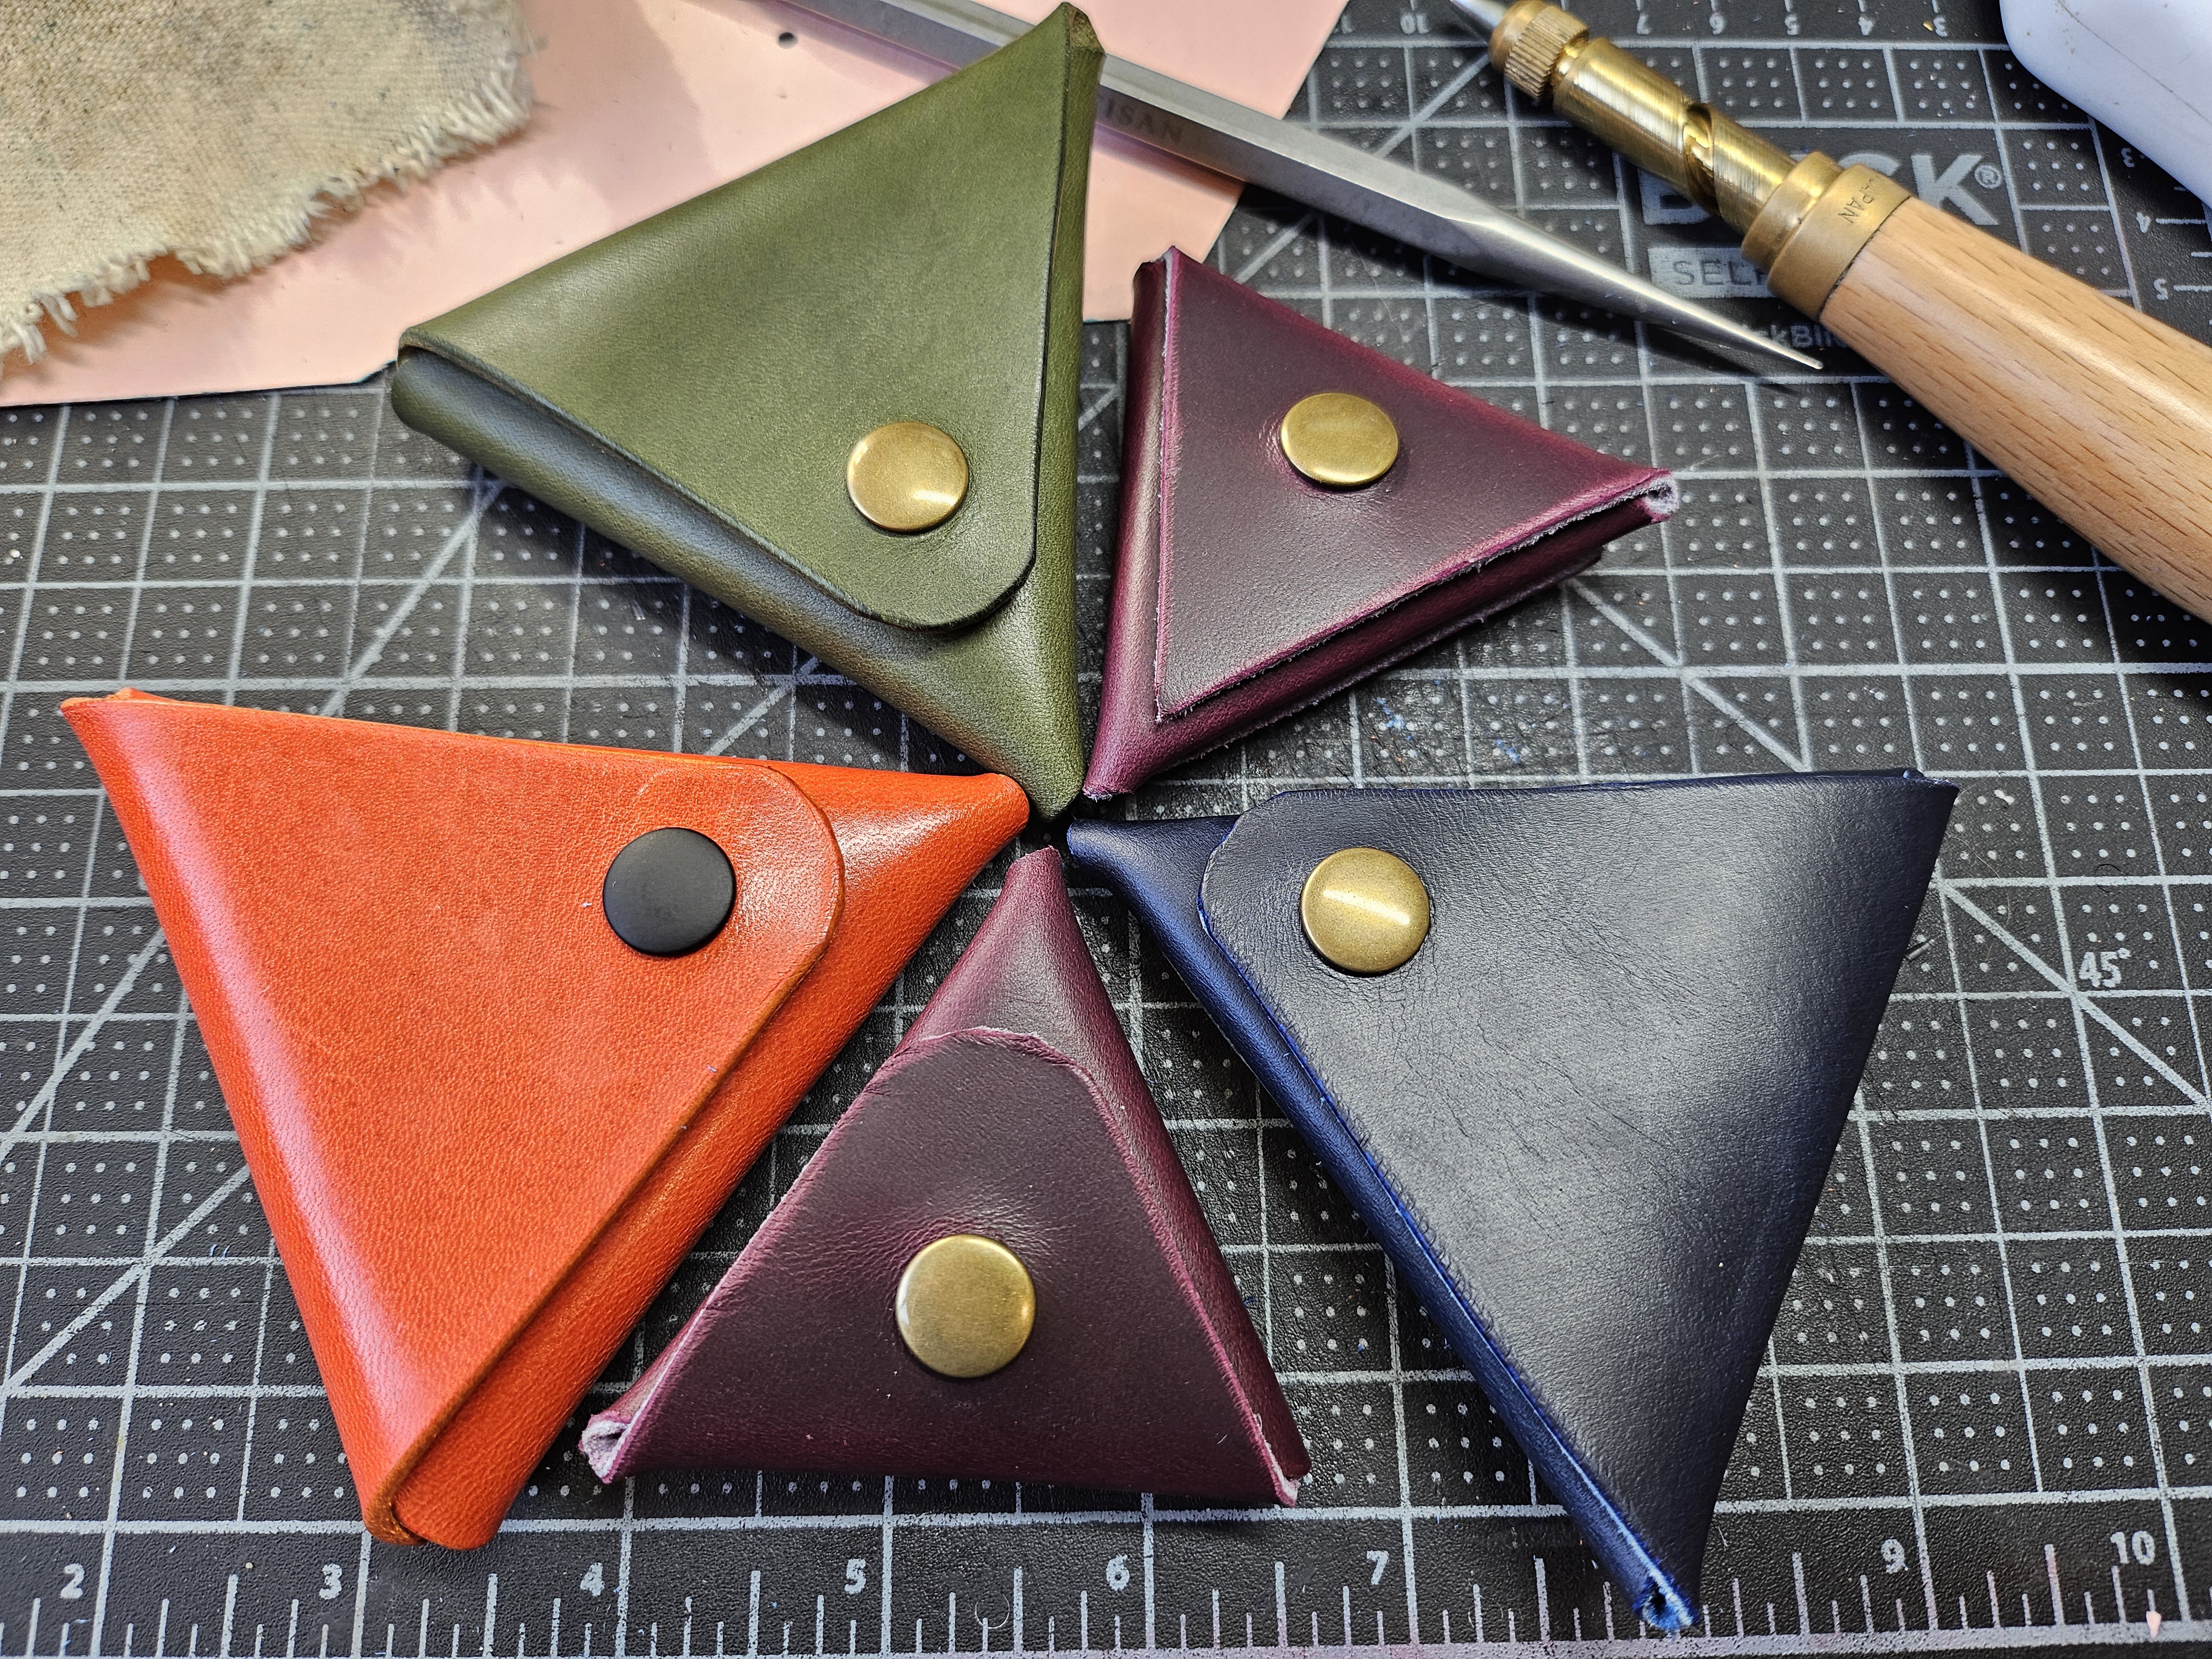 5 small triangular pouches made of leather in two sizes and various colors.